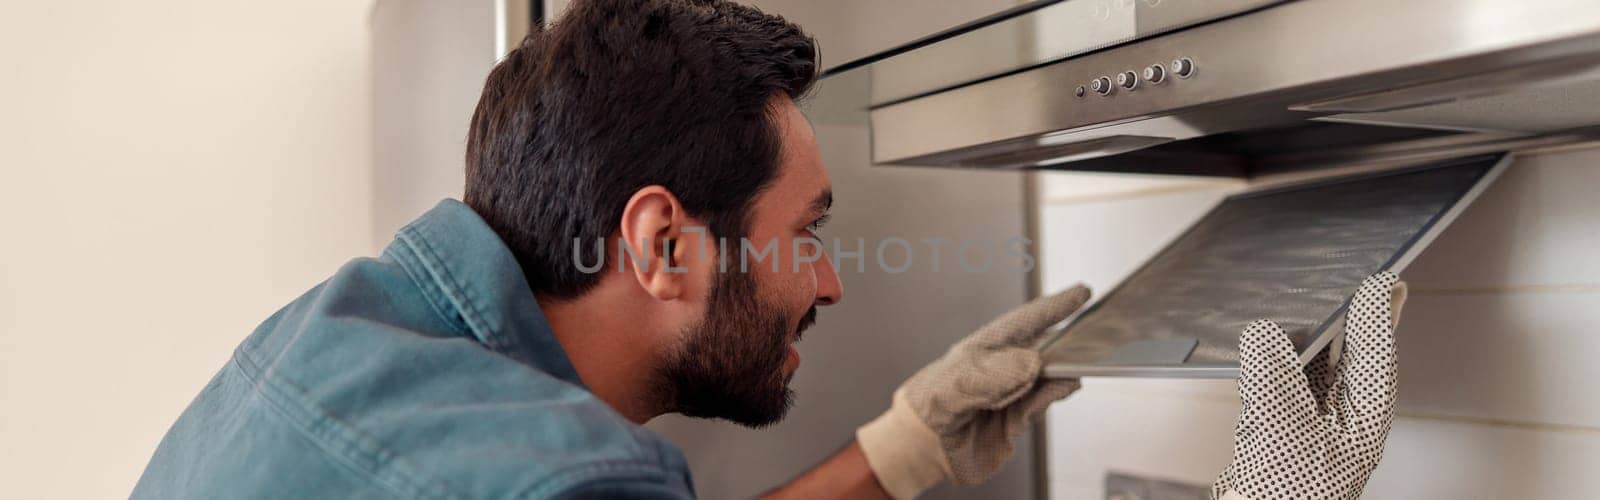 Service man repairing kitchen extractor, replacing filter in cooker hood. High quality photo